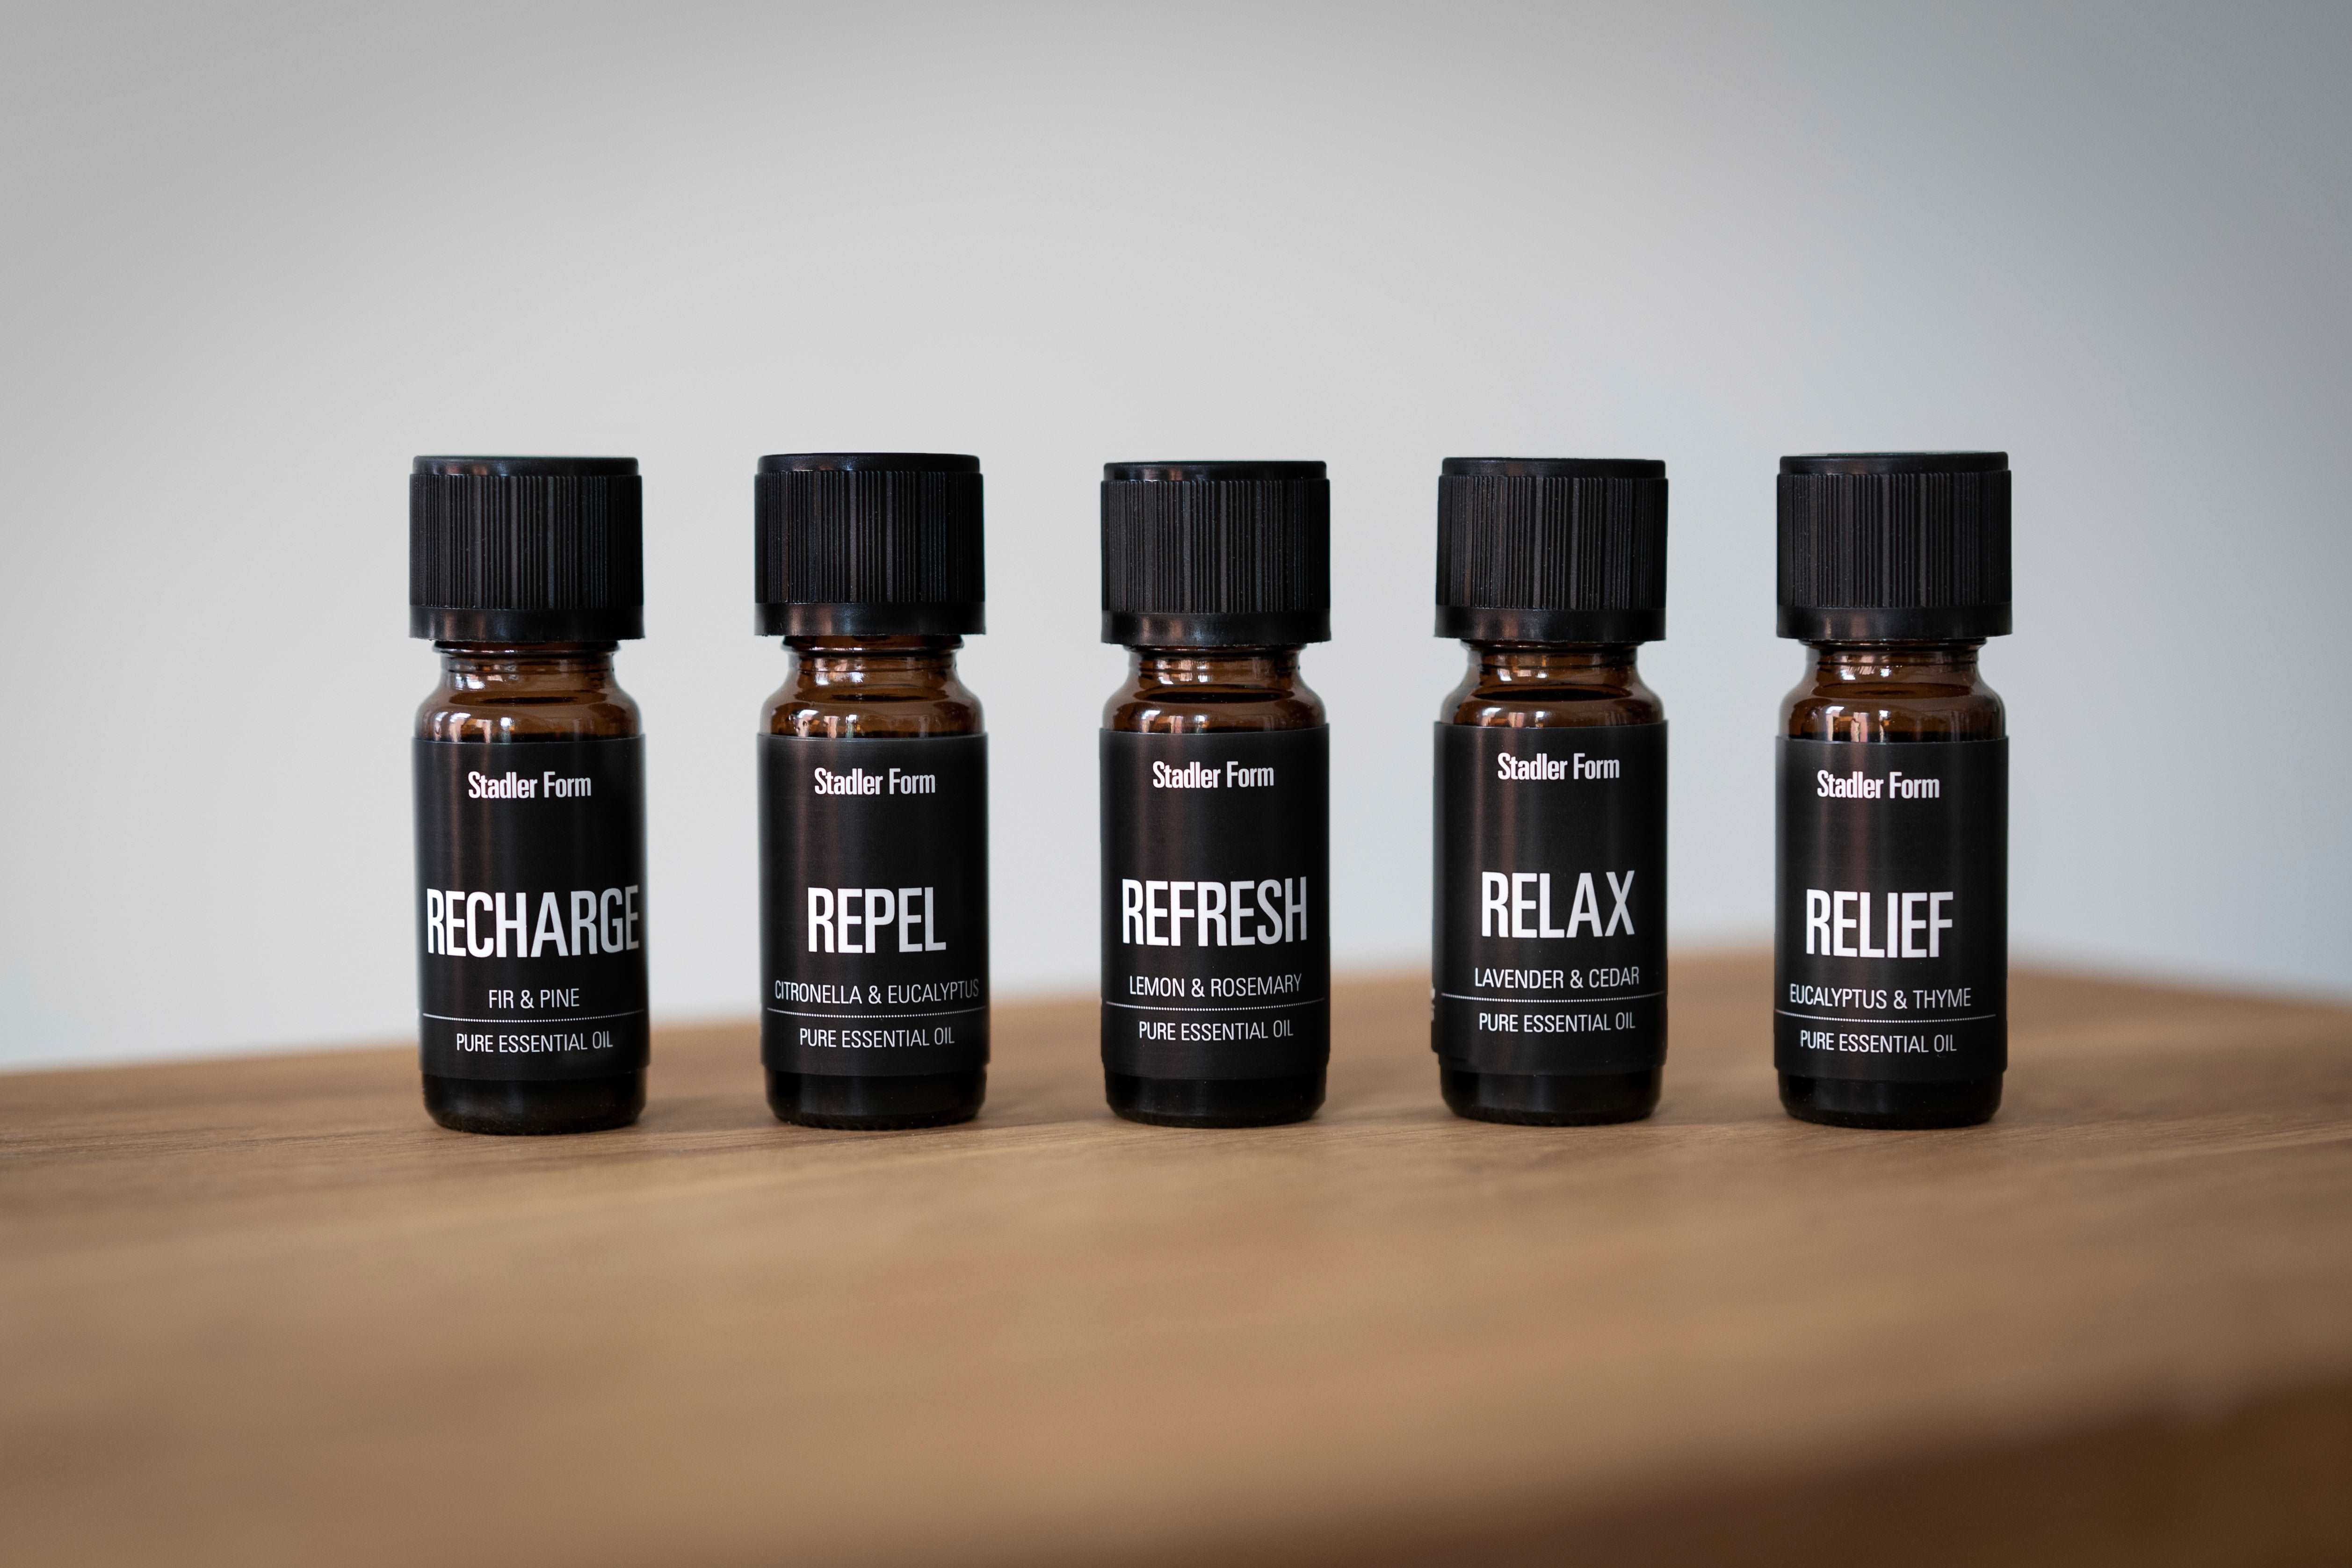 Essential oil Relax